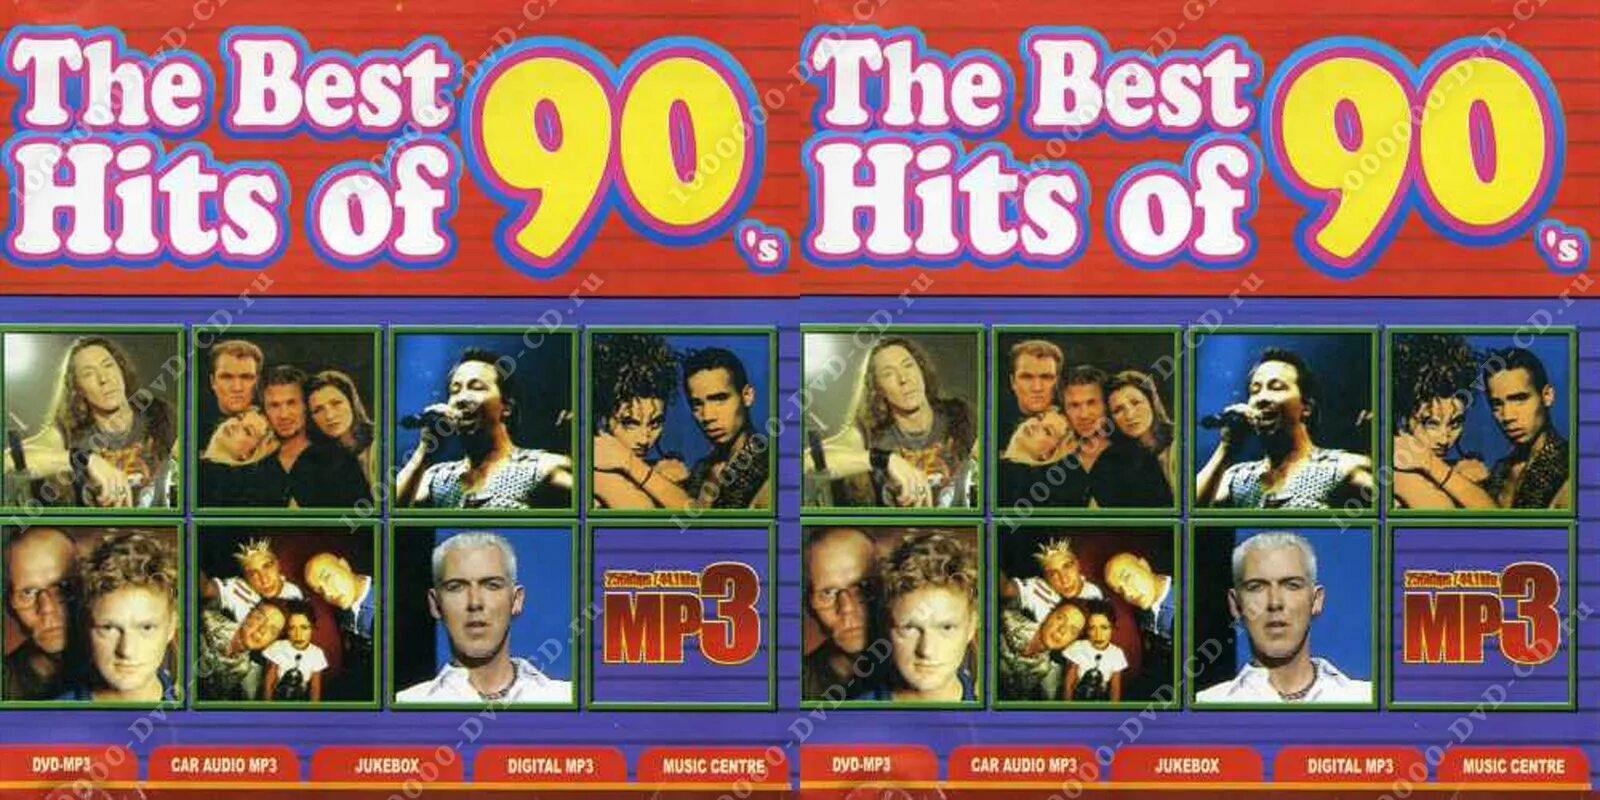 The best Hits of 90's диск. The best Hits of 90's сборник 2003. The best Hits 2000-х. "Best of the best 90's". Hits 90 s